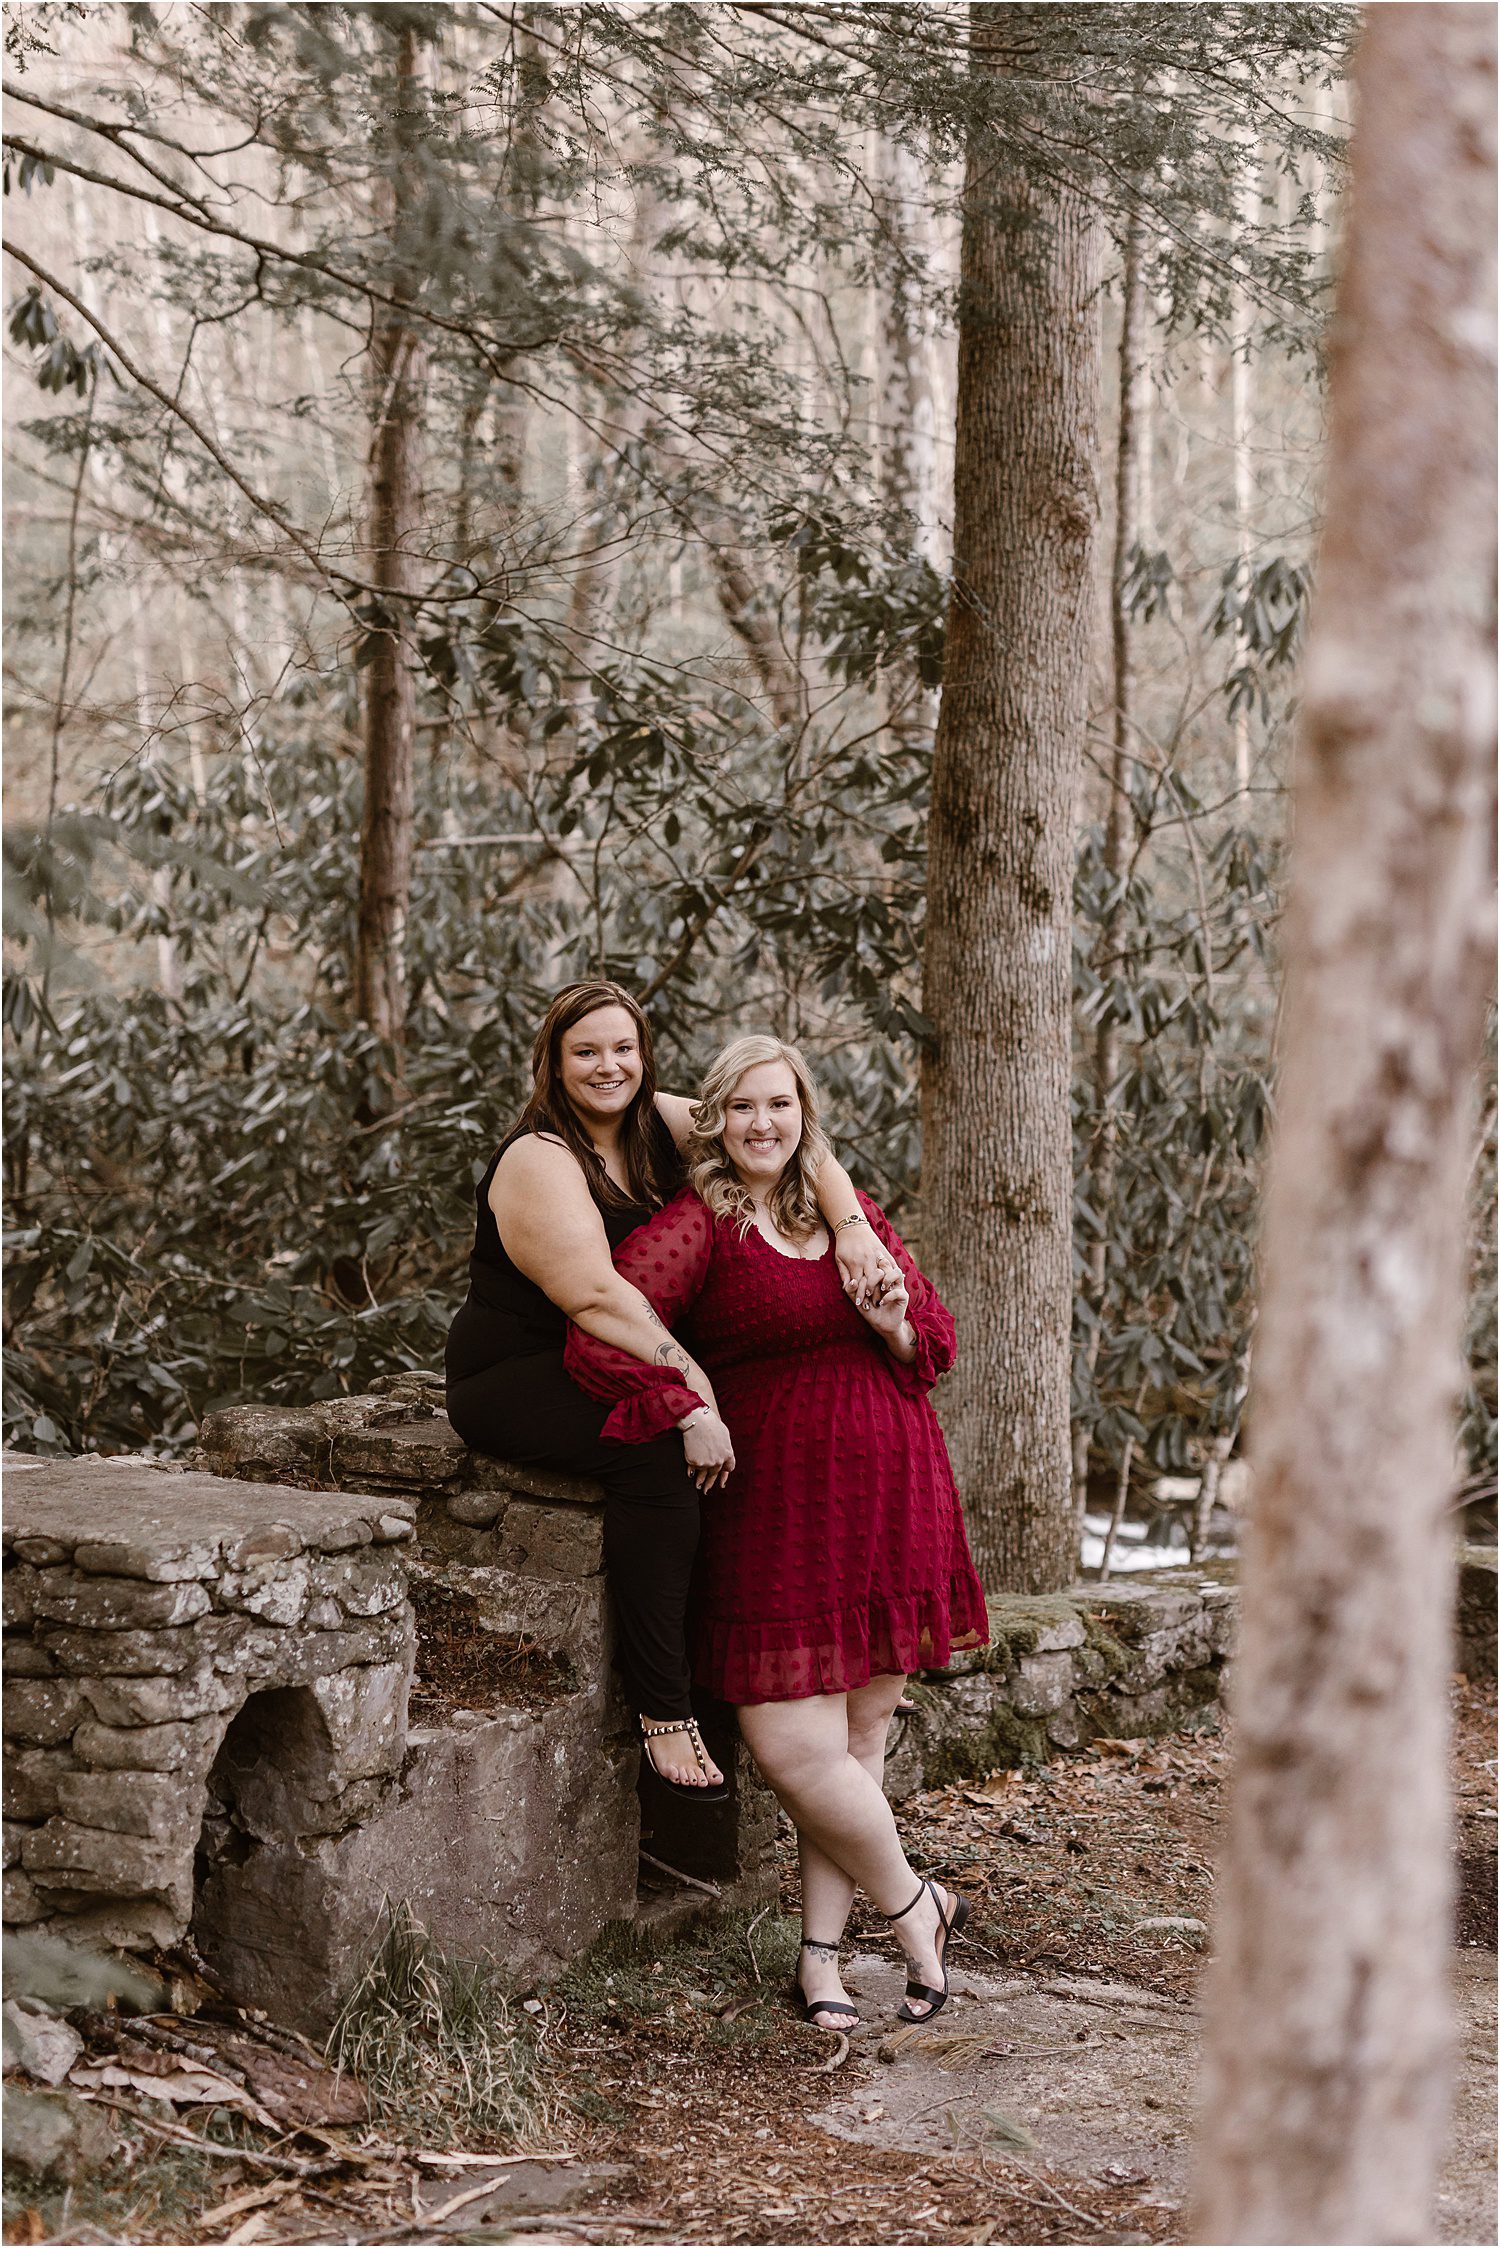 Elkmont Mini-Sessions in The Great Smoky Mountains National Park